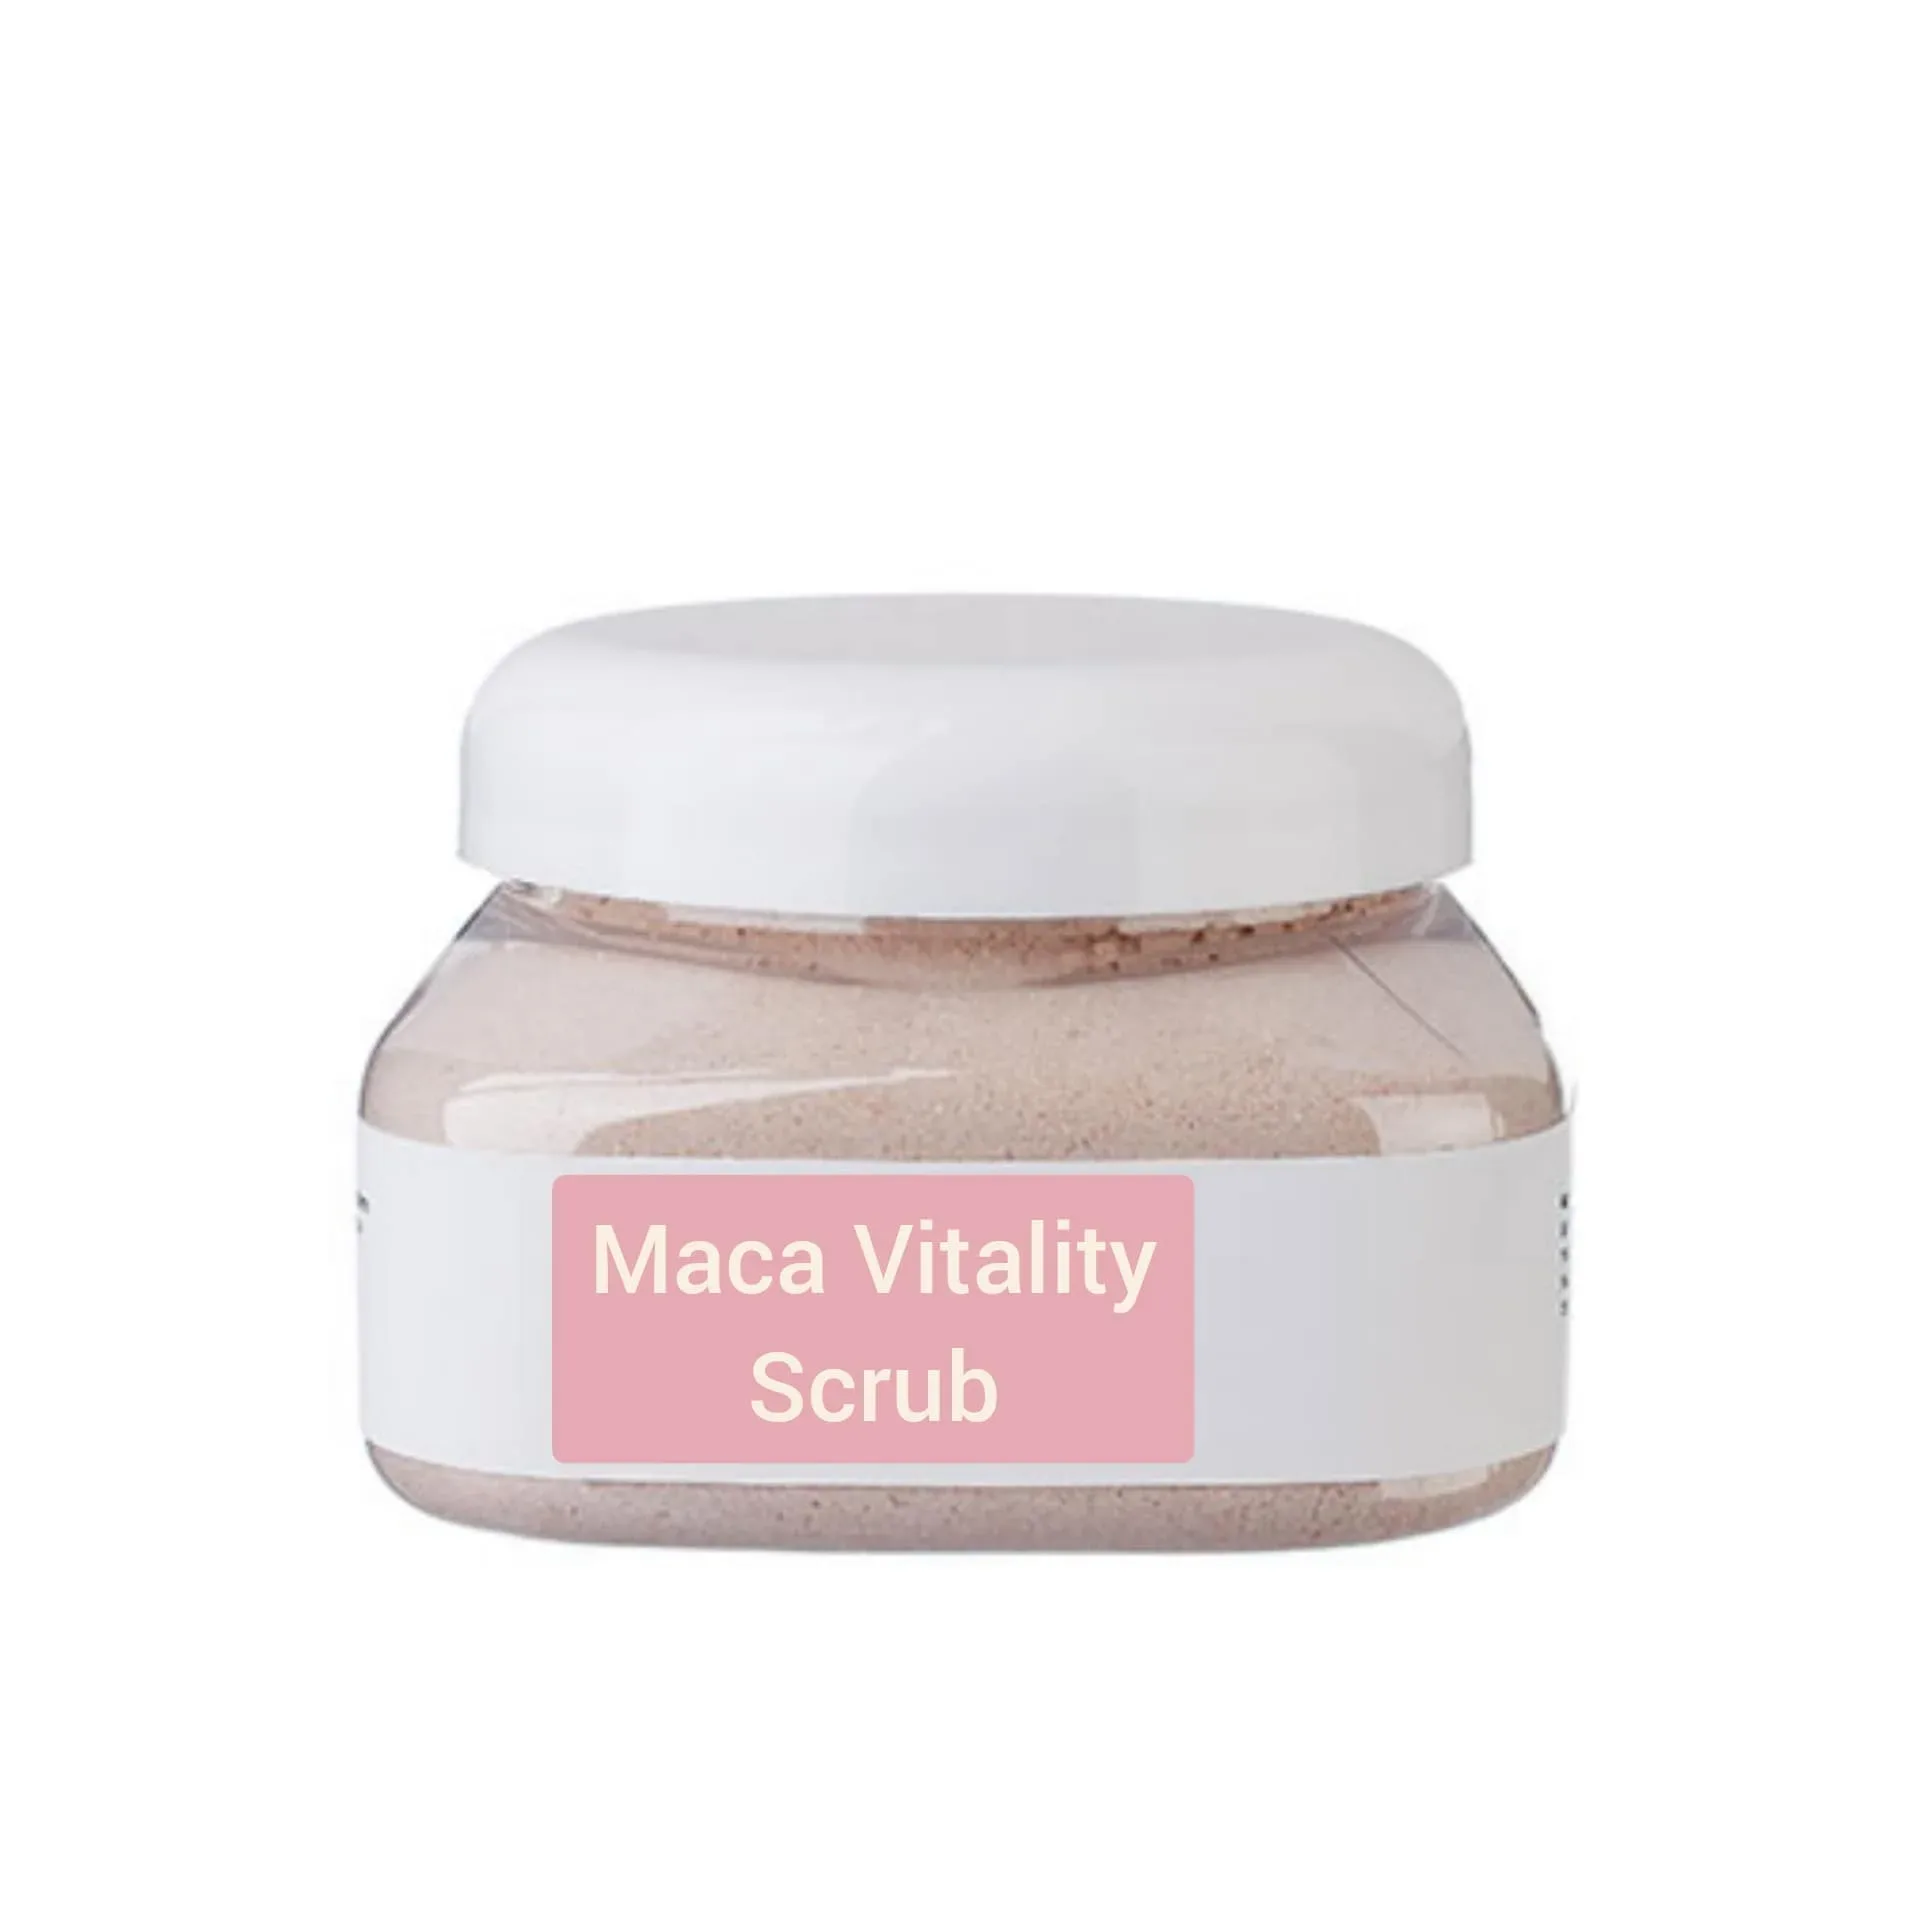 Maca Vitality Scrub: How To and Its Benefits For Skin